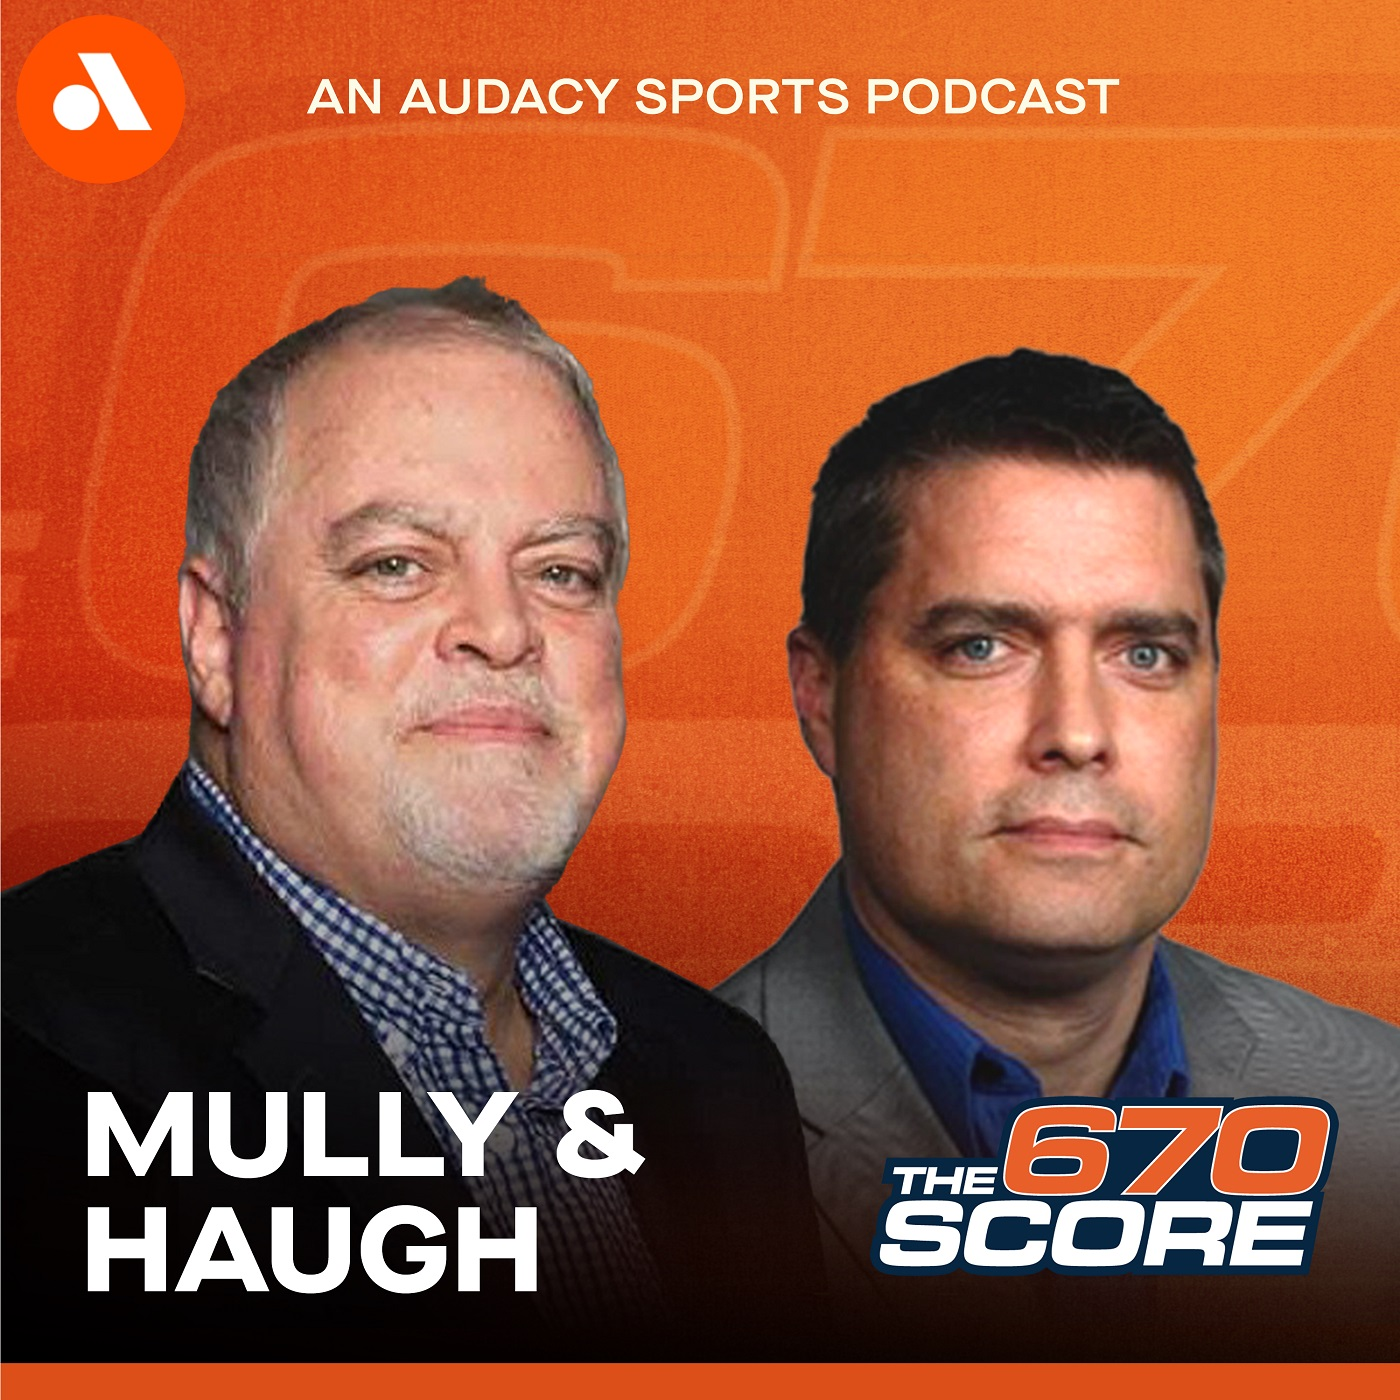 Mully & Haugh: Tommy Hottovy interview, Bears talk (Hour 4)